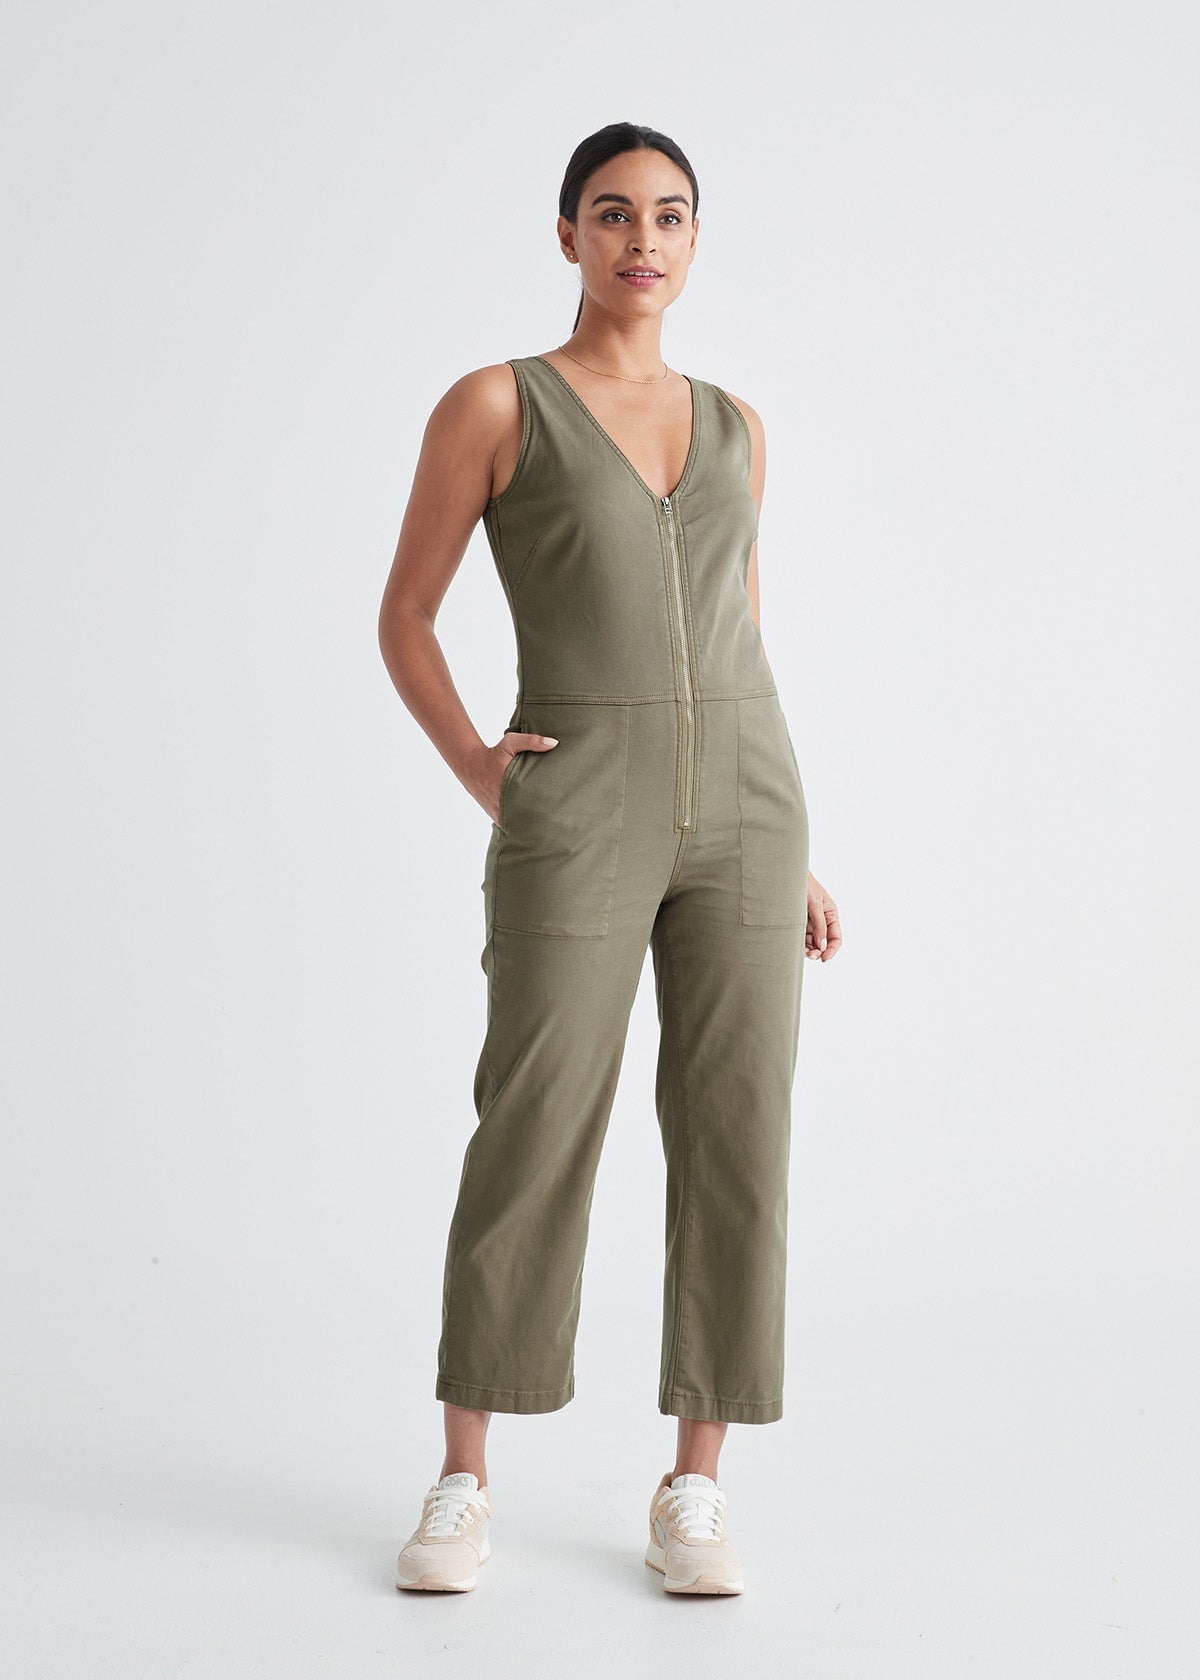 Buy Best women jumpsuits Online in India at Best Price | Myntra